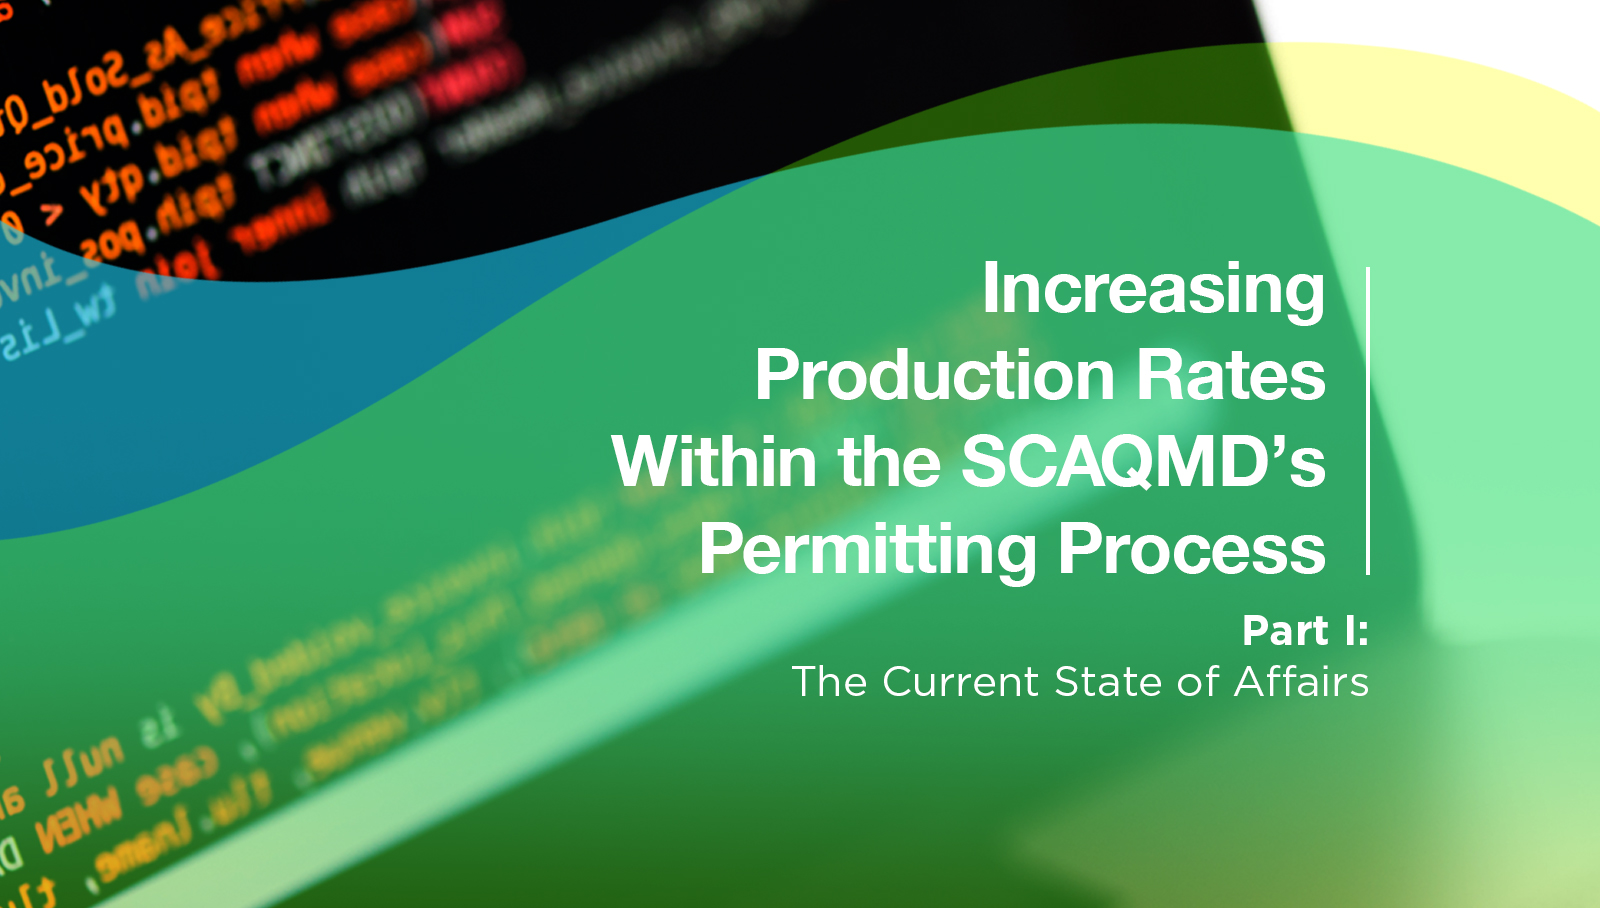 Increasing Production Rates Within the SCAQMD’s Permitting Process, Part I: The Current State of Affairs